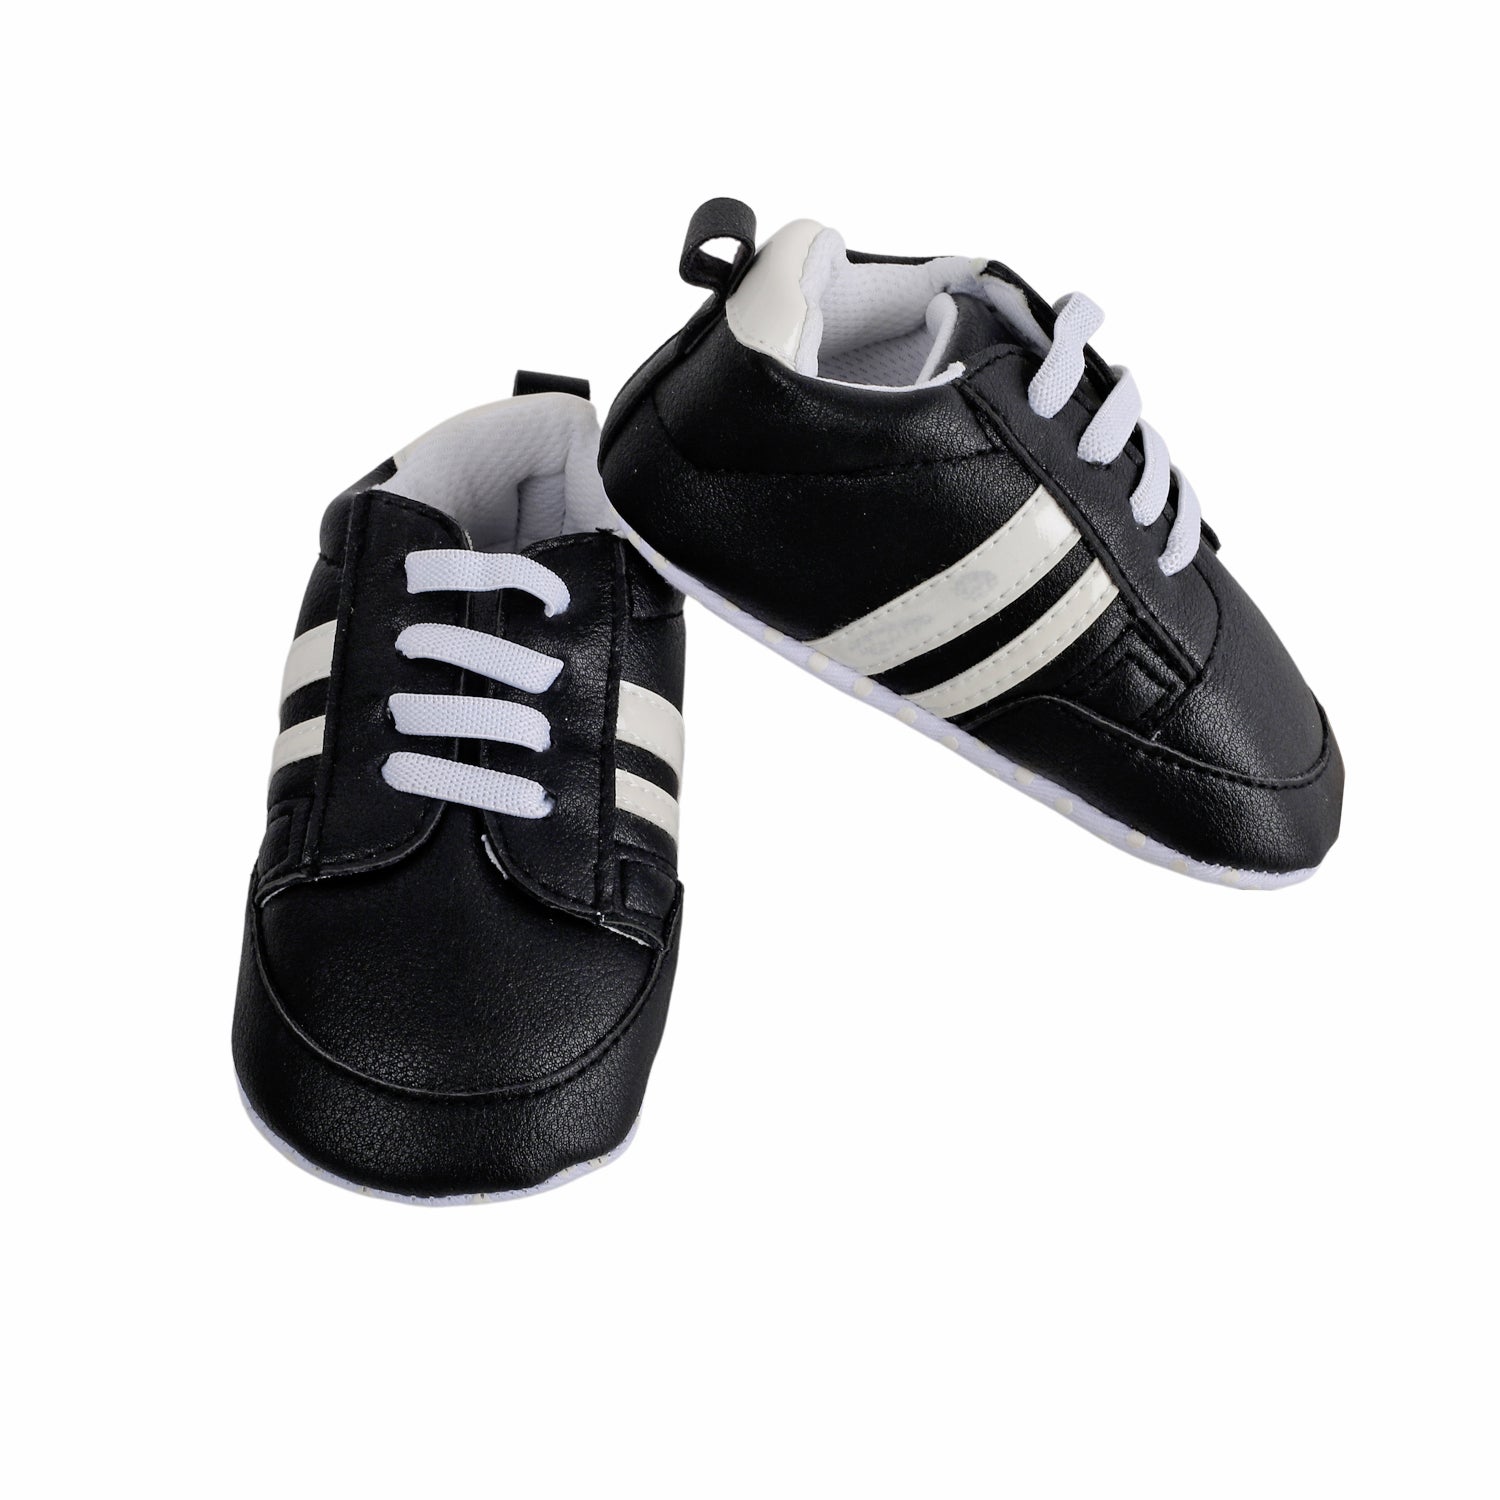 Baby Moo White Stripes On Black Sneakers - Baby Moo